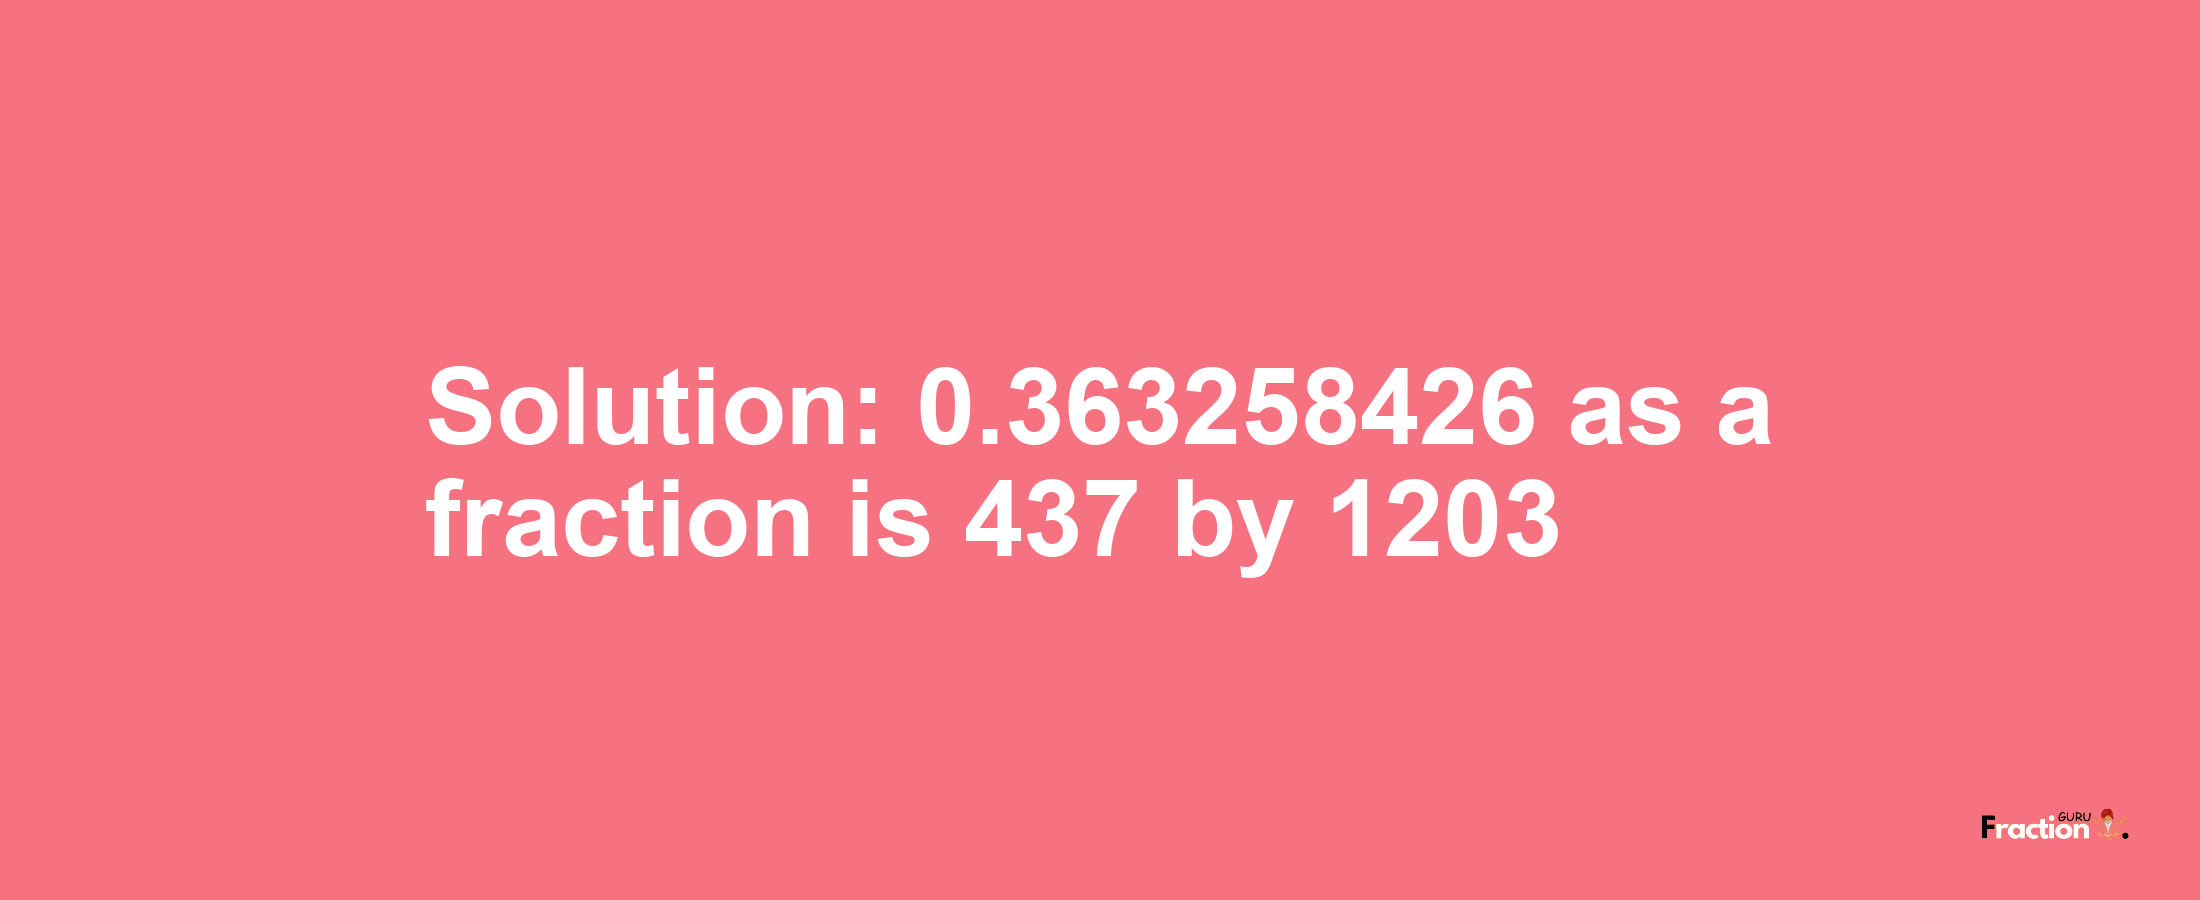 Solution:0.363258426 as a fraction is 437/1203